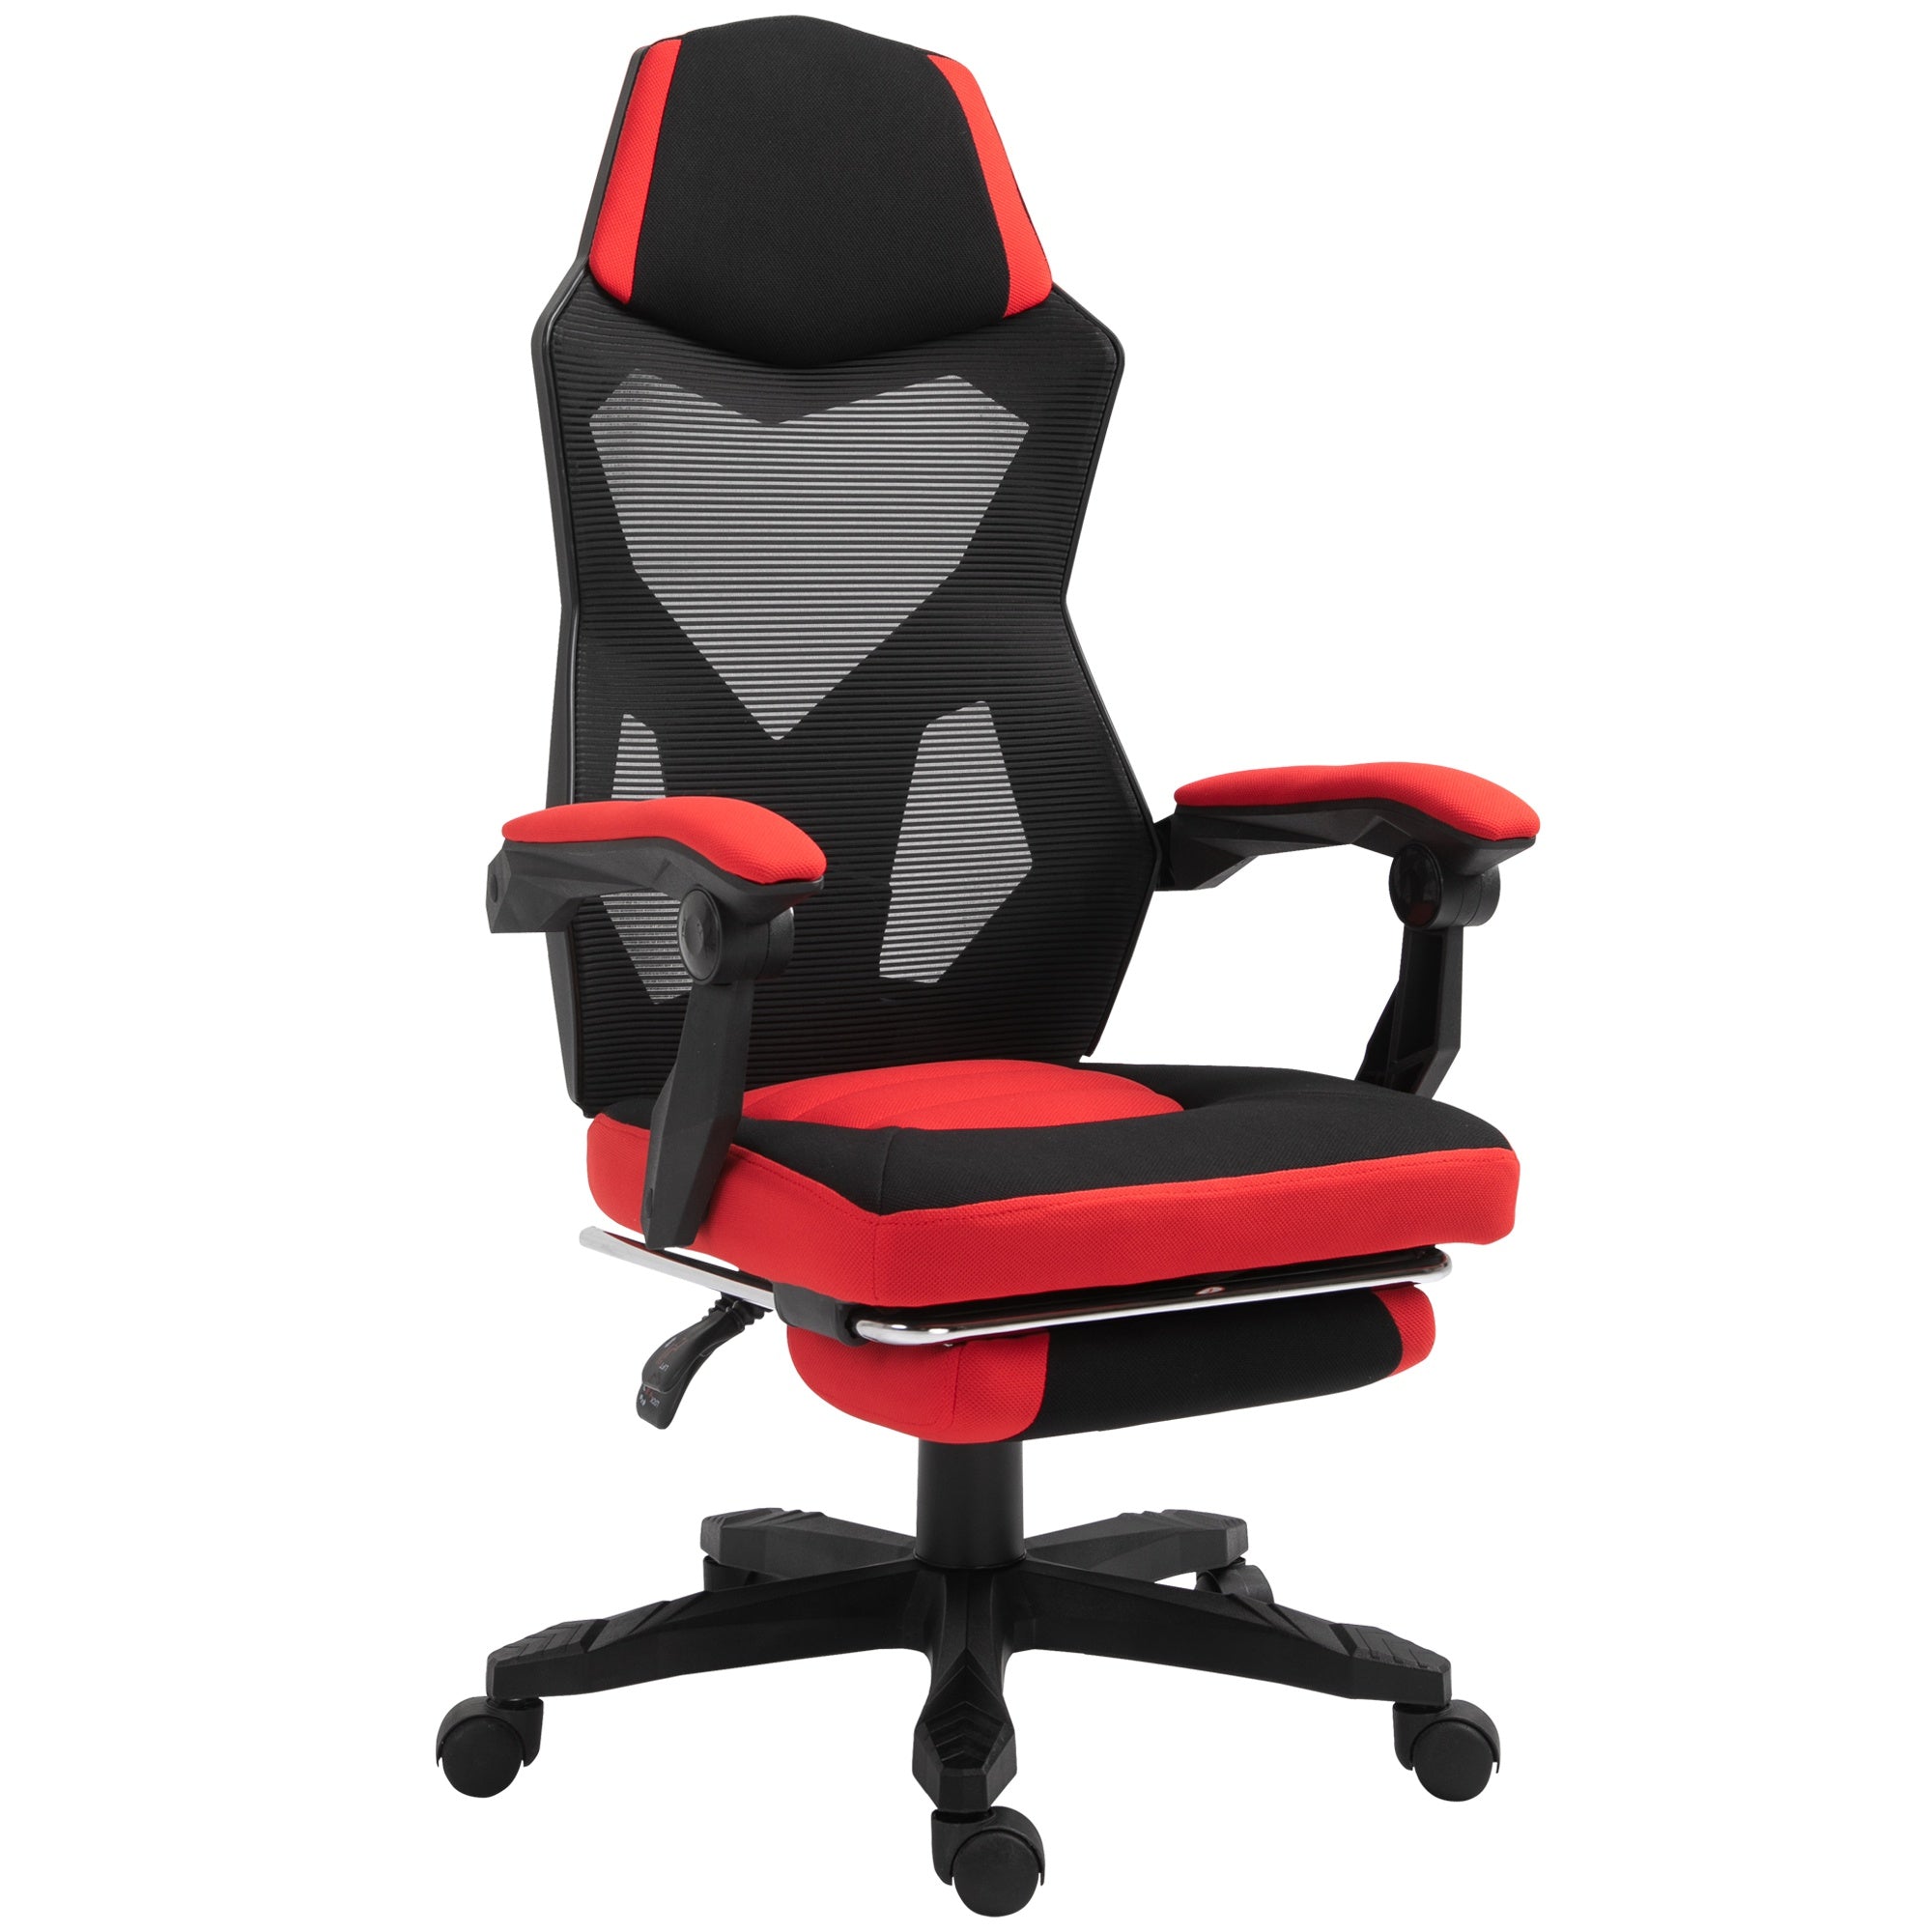 Nancy's Piqua Gaming Chair - Swivel chair - Footrest - Mesh - Adjustable in Height - 58 x 72 x 108-118 cm - Black - Red